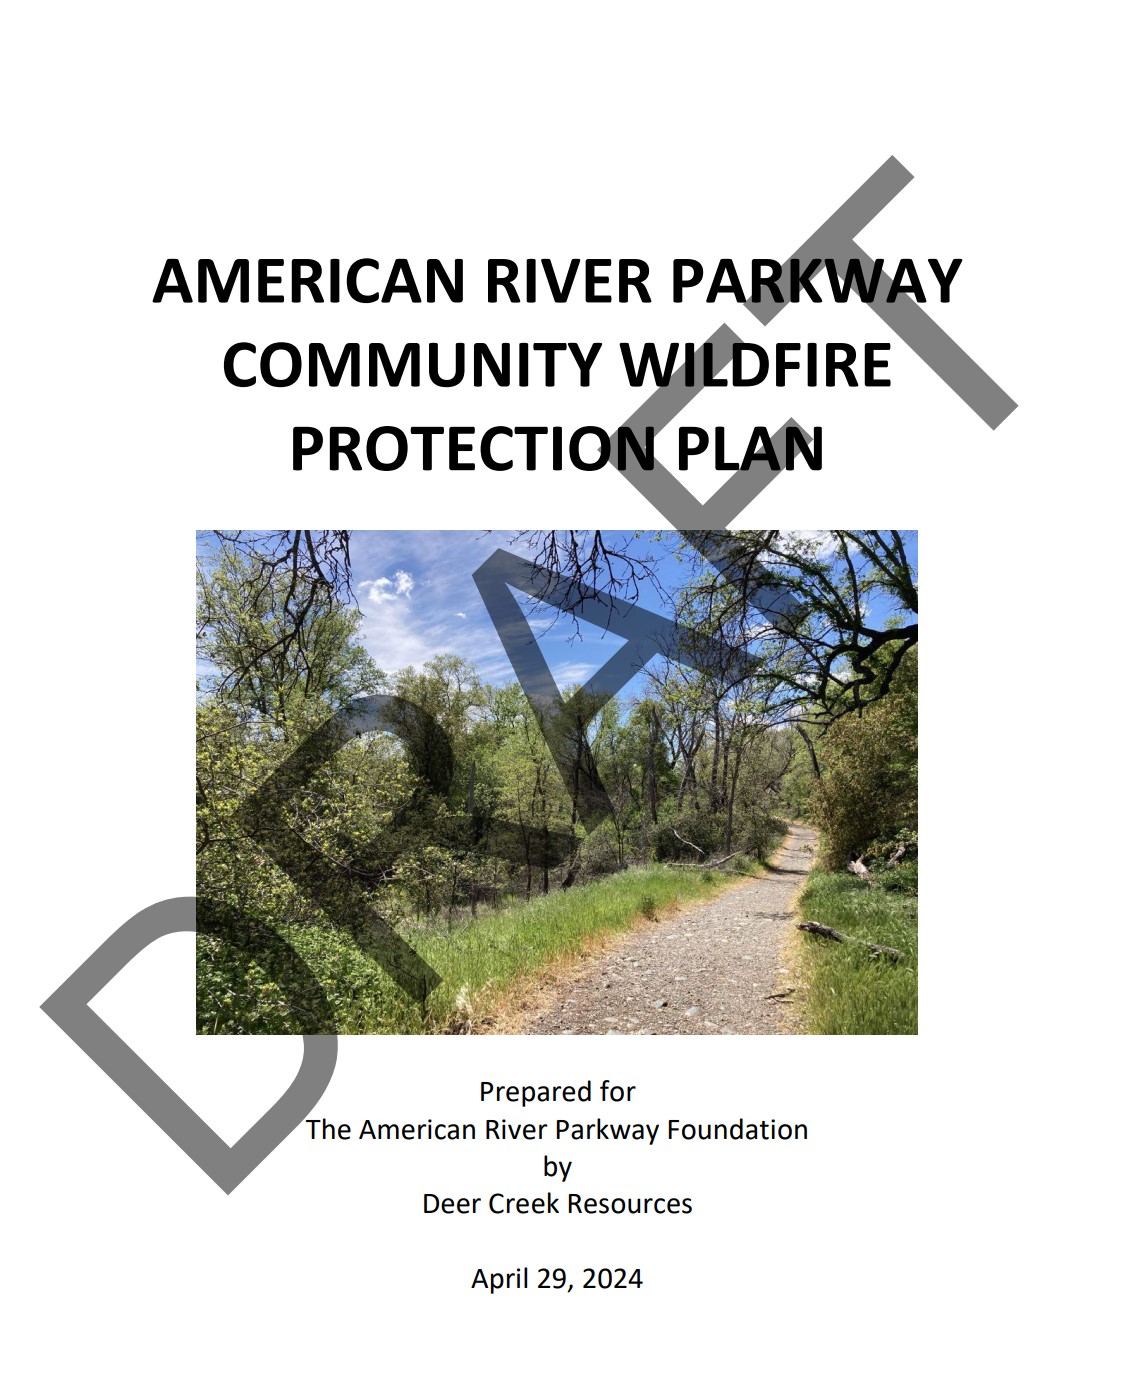 Community Wildfire Protection Plan (CWPP)